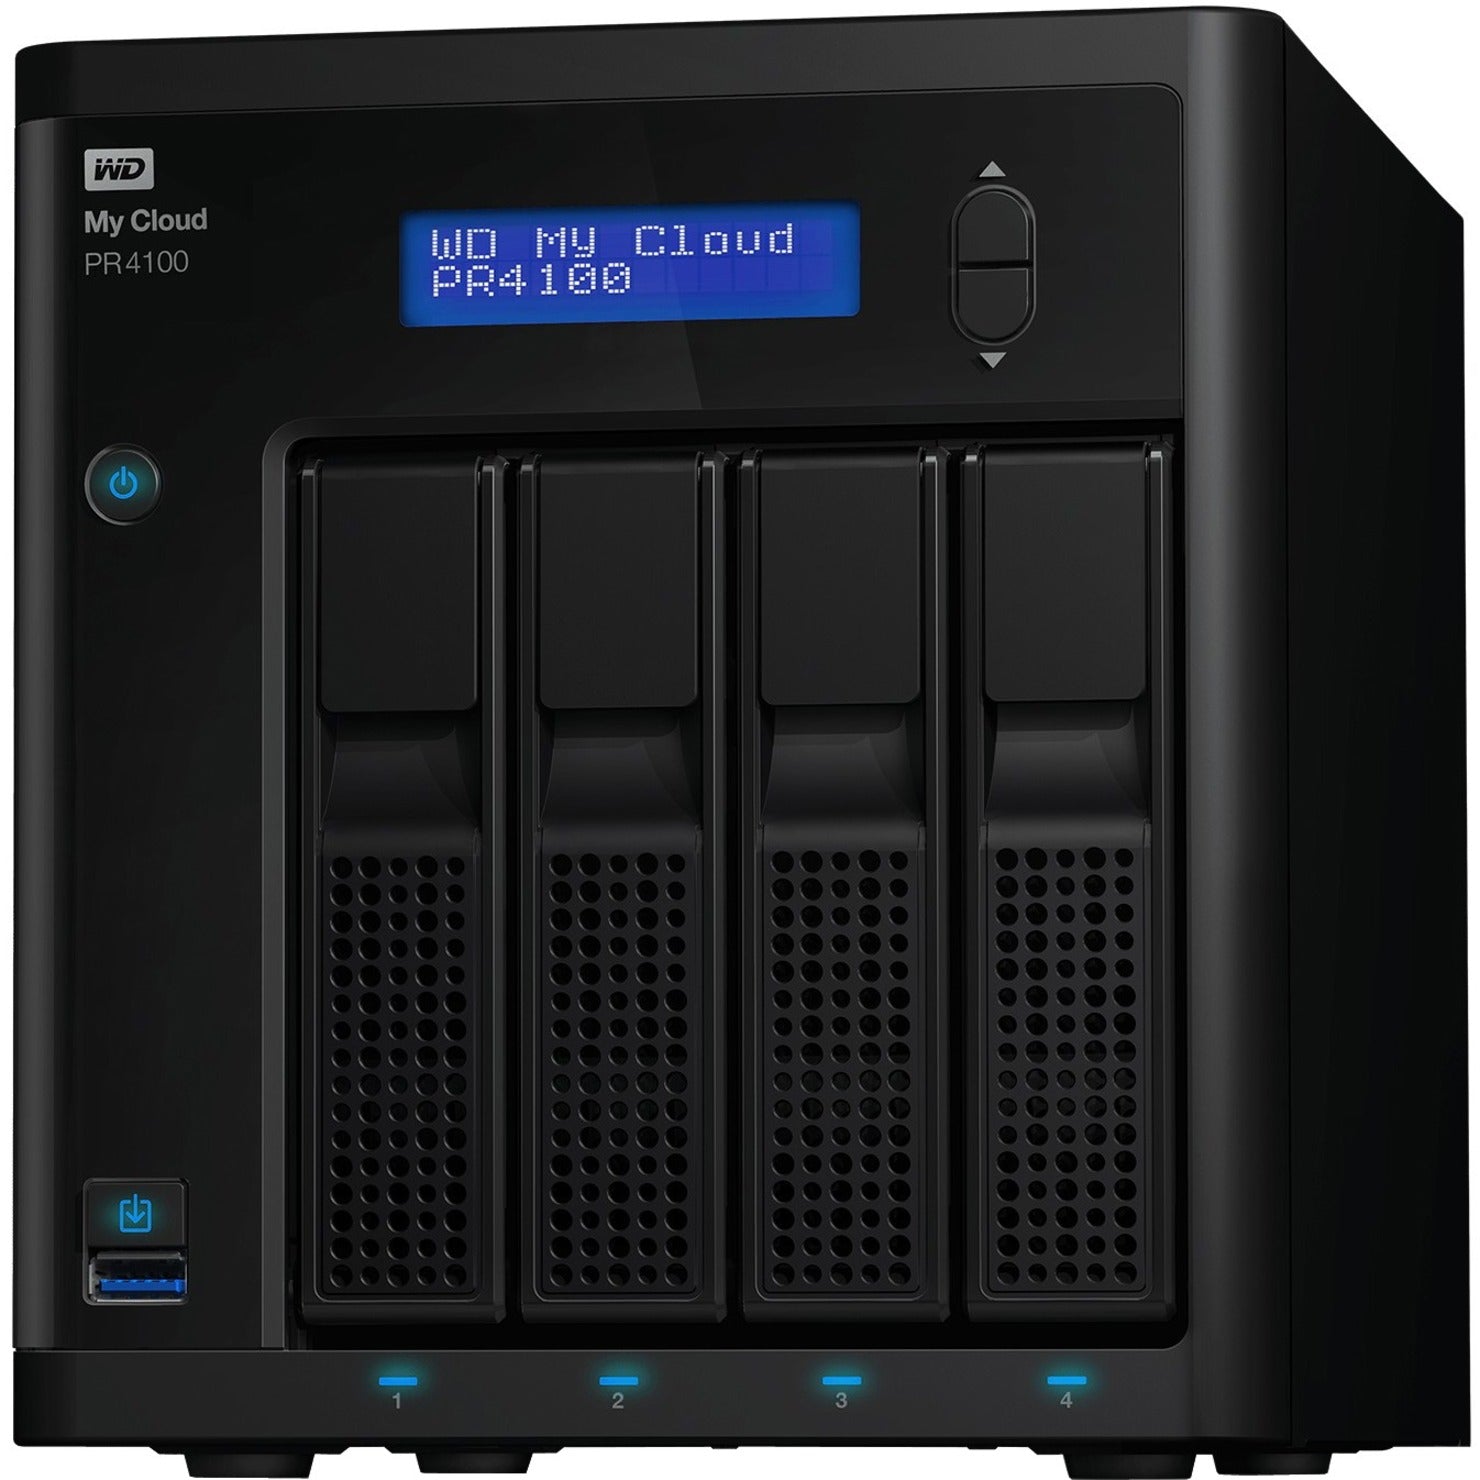 WD My Cloud Pro Series PR4100 Media Server with Transcoding, NAS - Network Attached Storage [Discontinued]